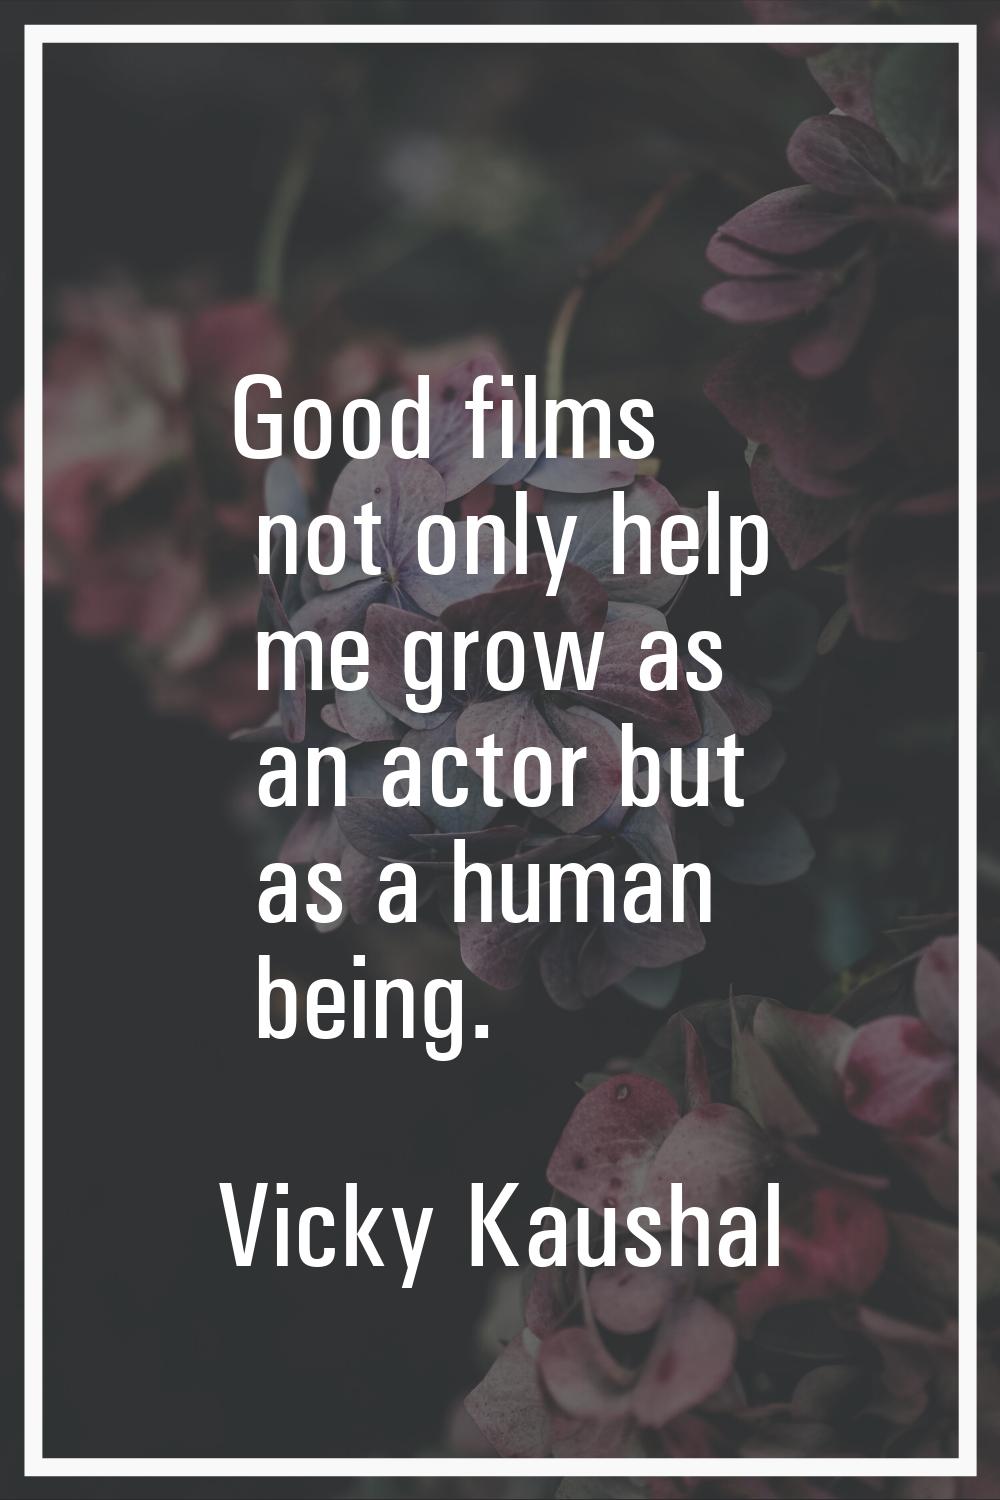 Good films not only help me grow as an actor but as a human being.